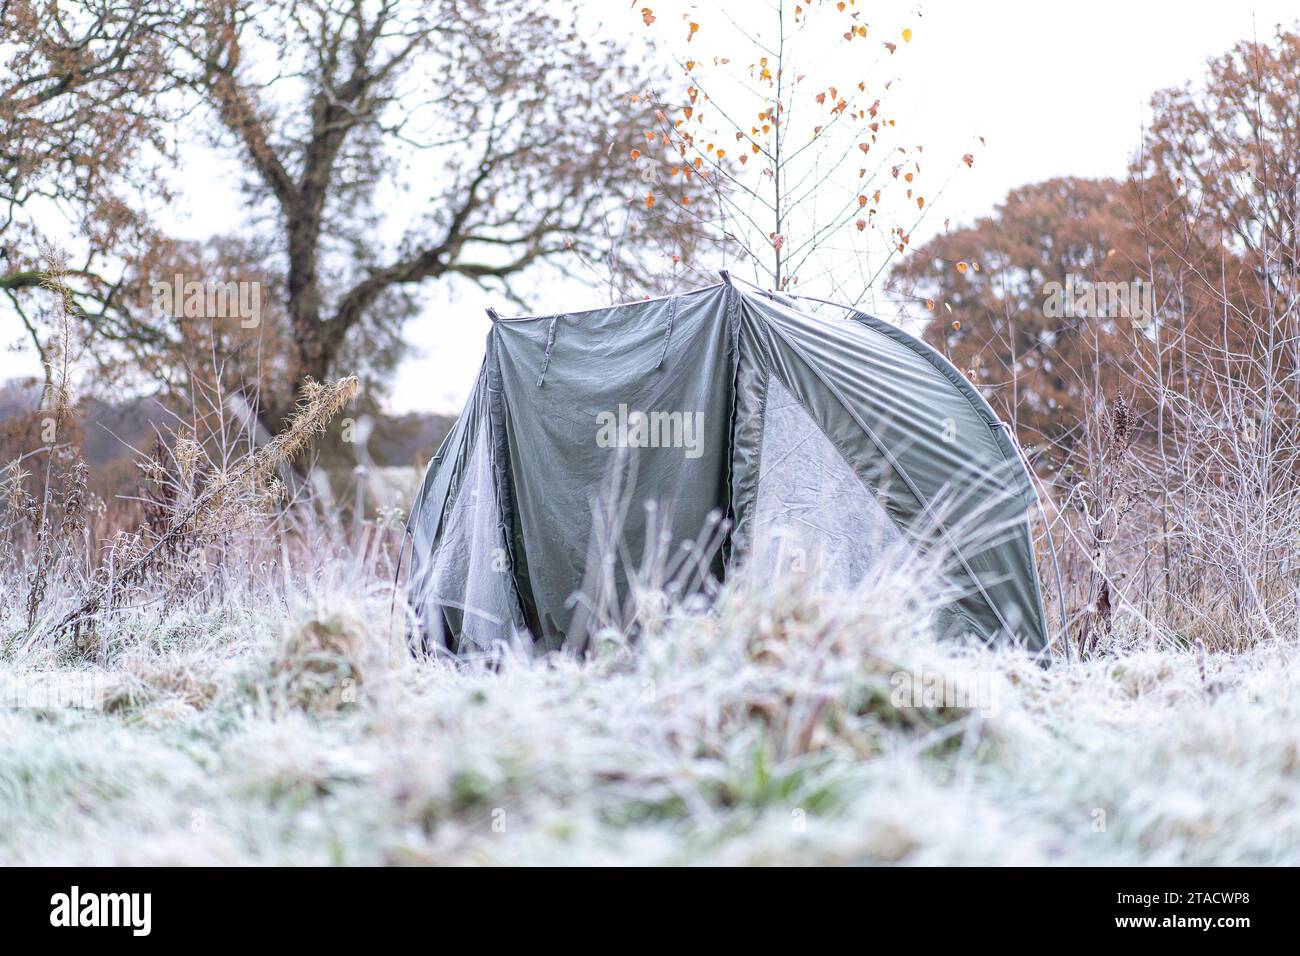 Kidderminster, UK. 30th November, 2023. UK weather: a harsh freeze hits the Midlands this morning leaving a crisp white frost across the ground. Some people struggle to keep warm as winter approaches with only meagre accommodation to keep the cold out. Credit: Lee Hudson/Alamy Live News Stock Photo